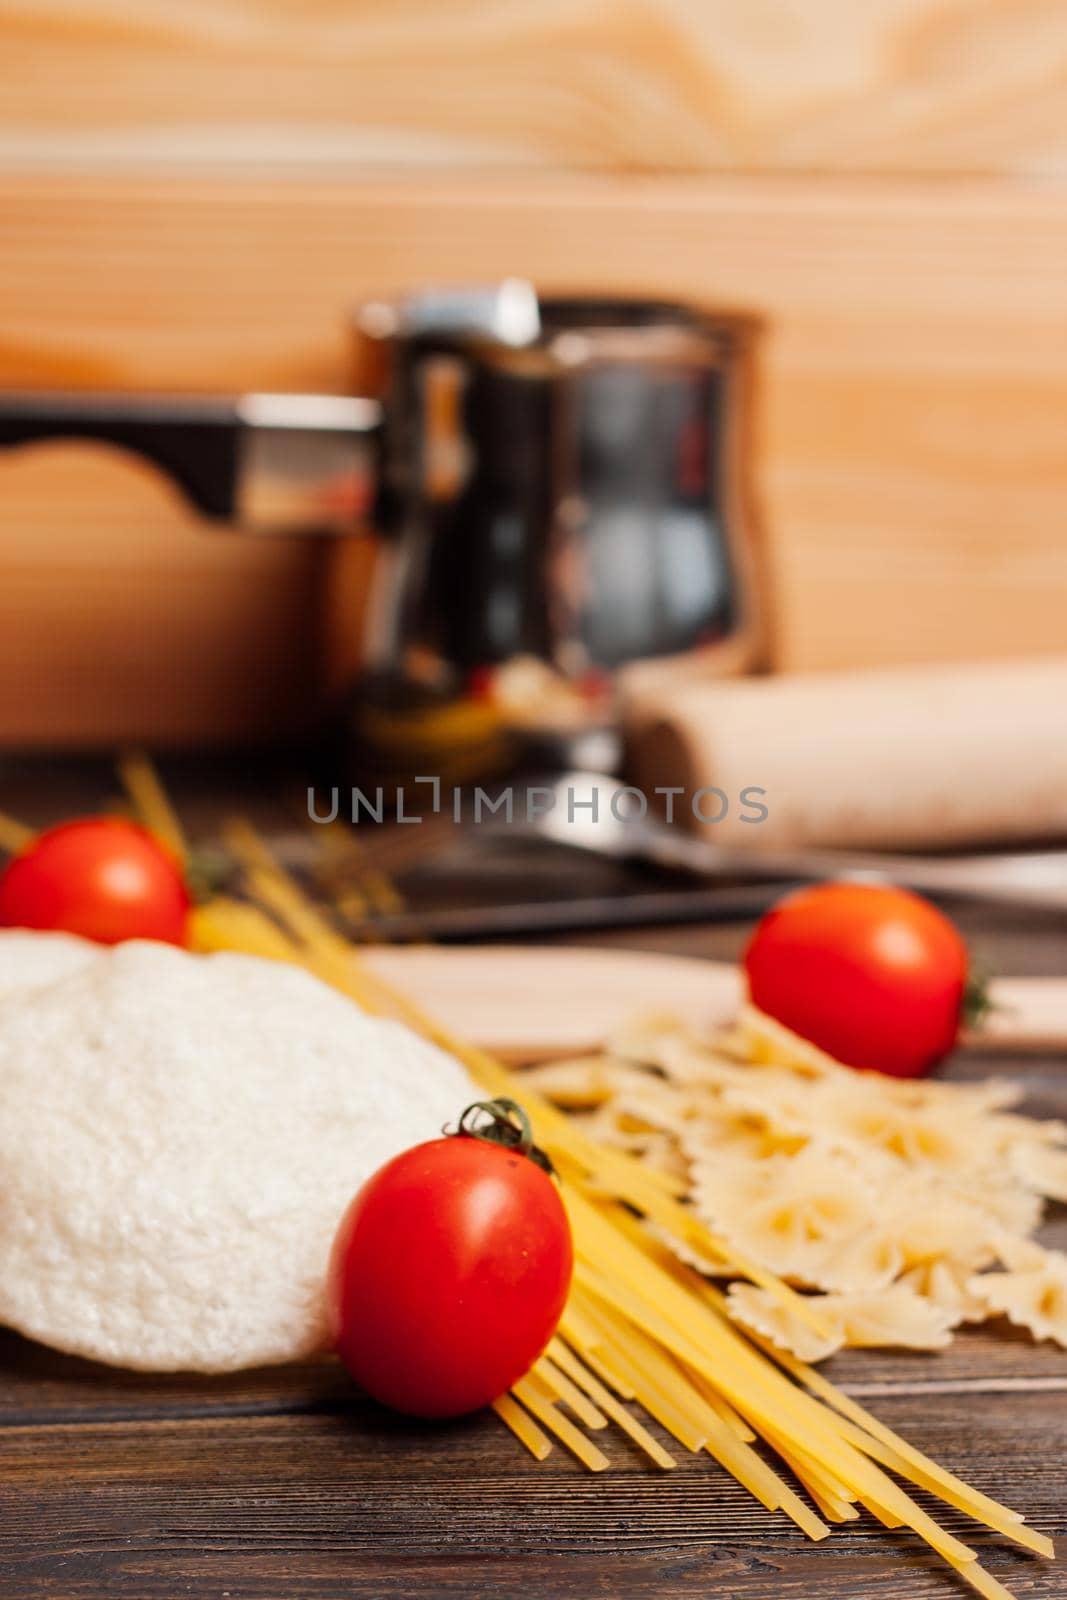 cherry tomatoes pasta kitchenware wooden table italian cuisine. High quality photo